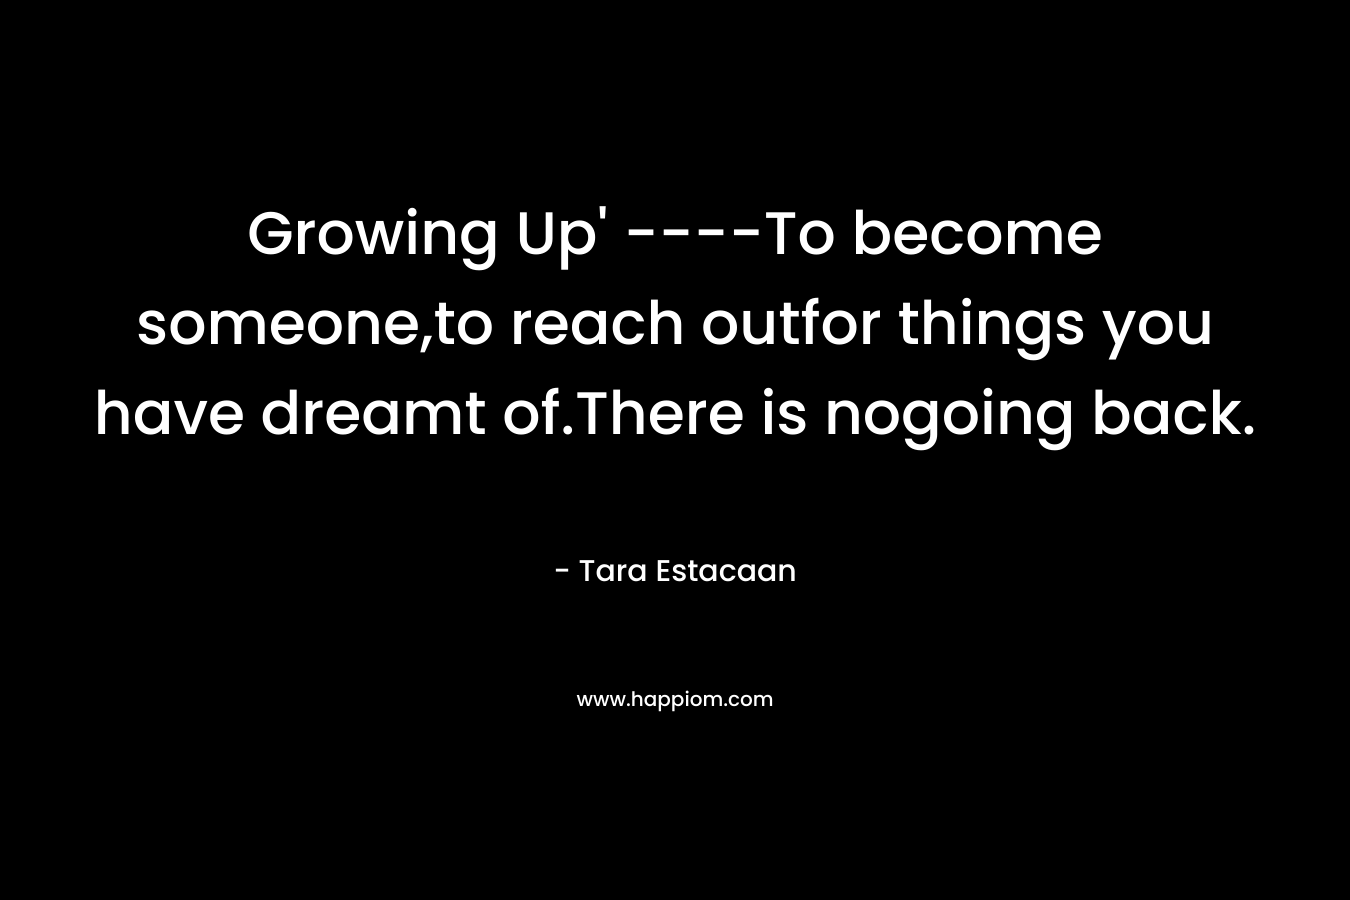 Growing Up’ —-To become someone,to reach outfor things you have dreamt of.There is nogoing back. – Tara Estacaan